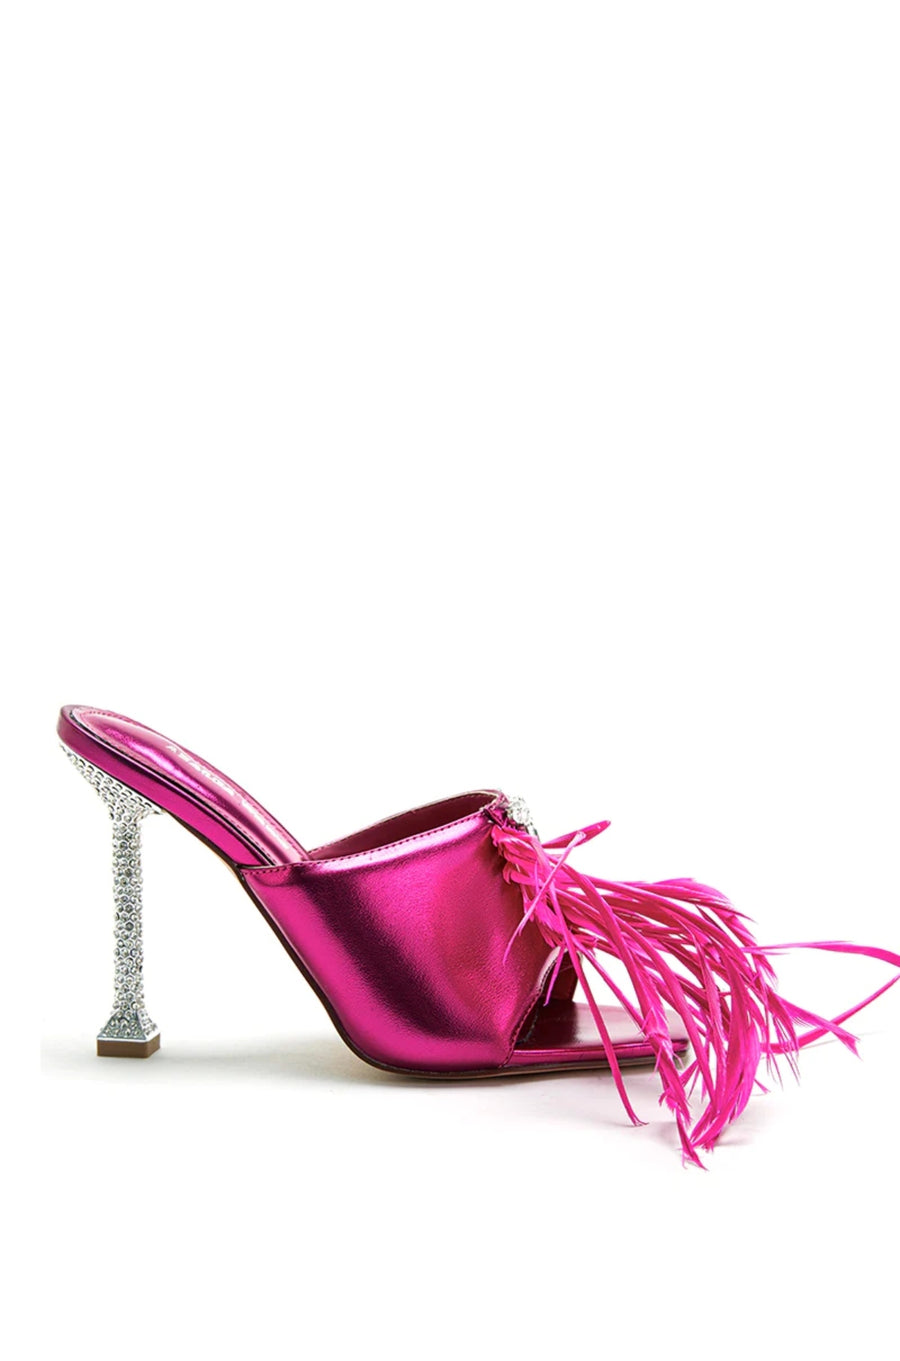 metallic pink open toe slip on heels with crystal and feather embellishment